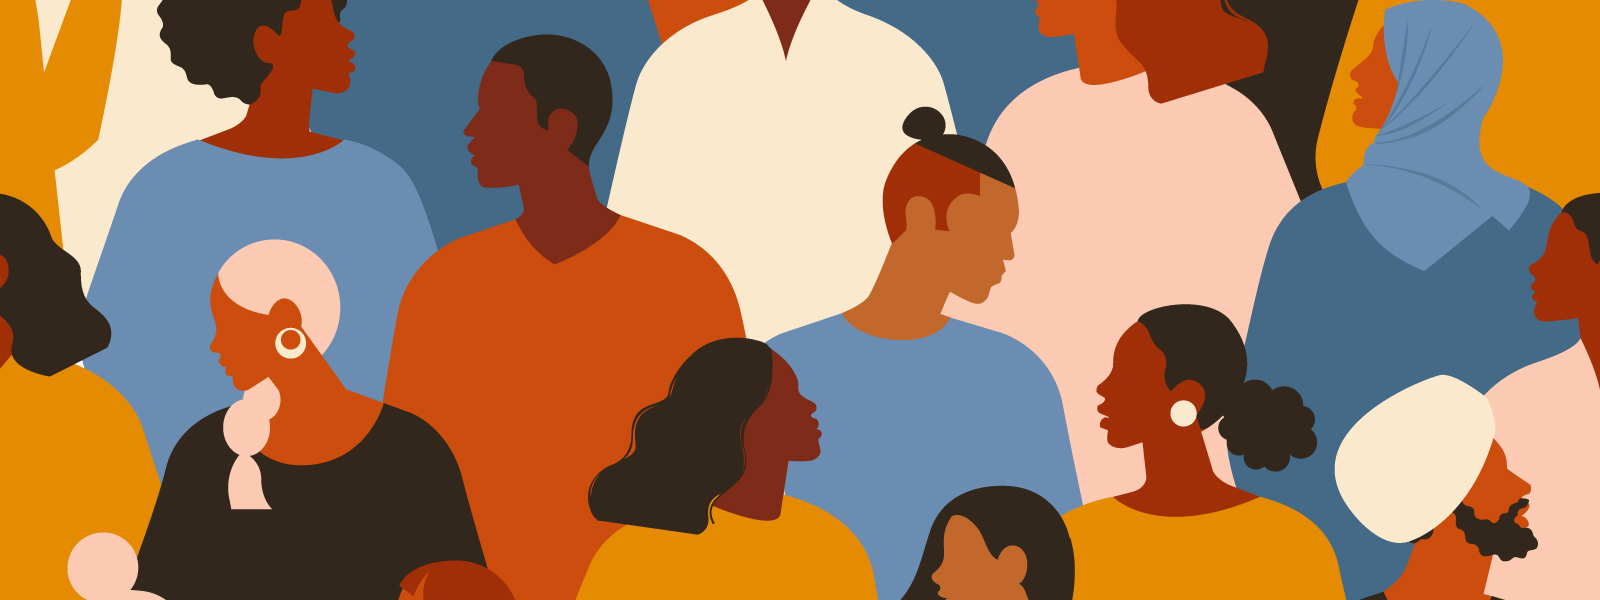 vector drawing of a diverse group of people